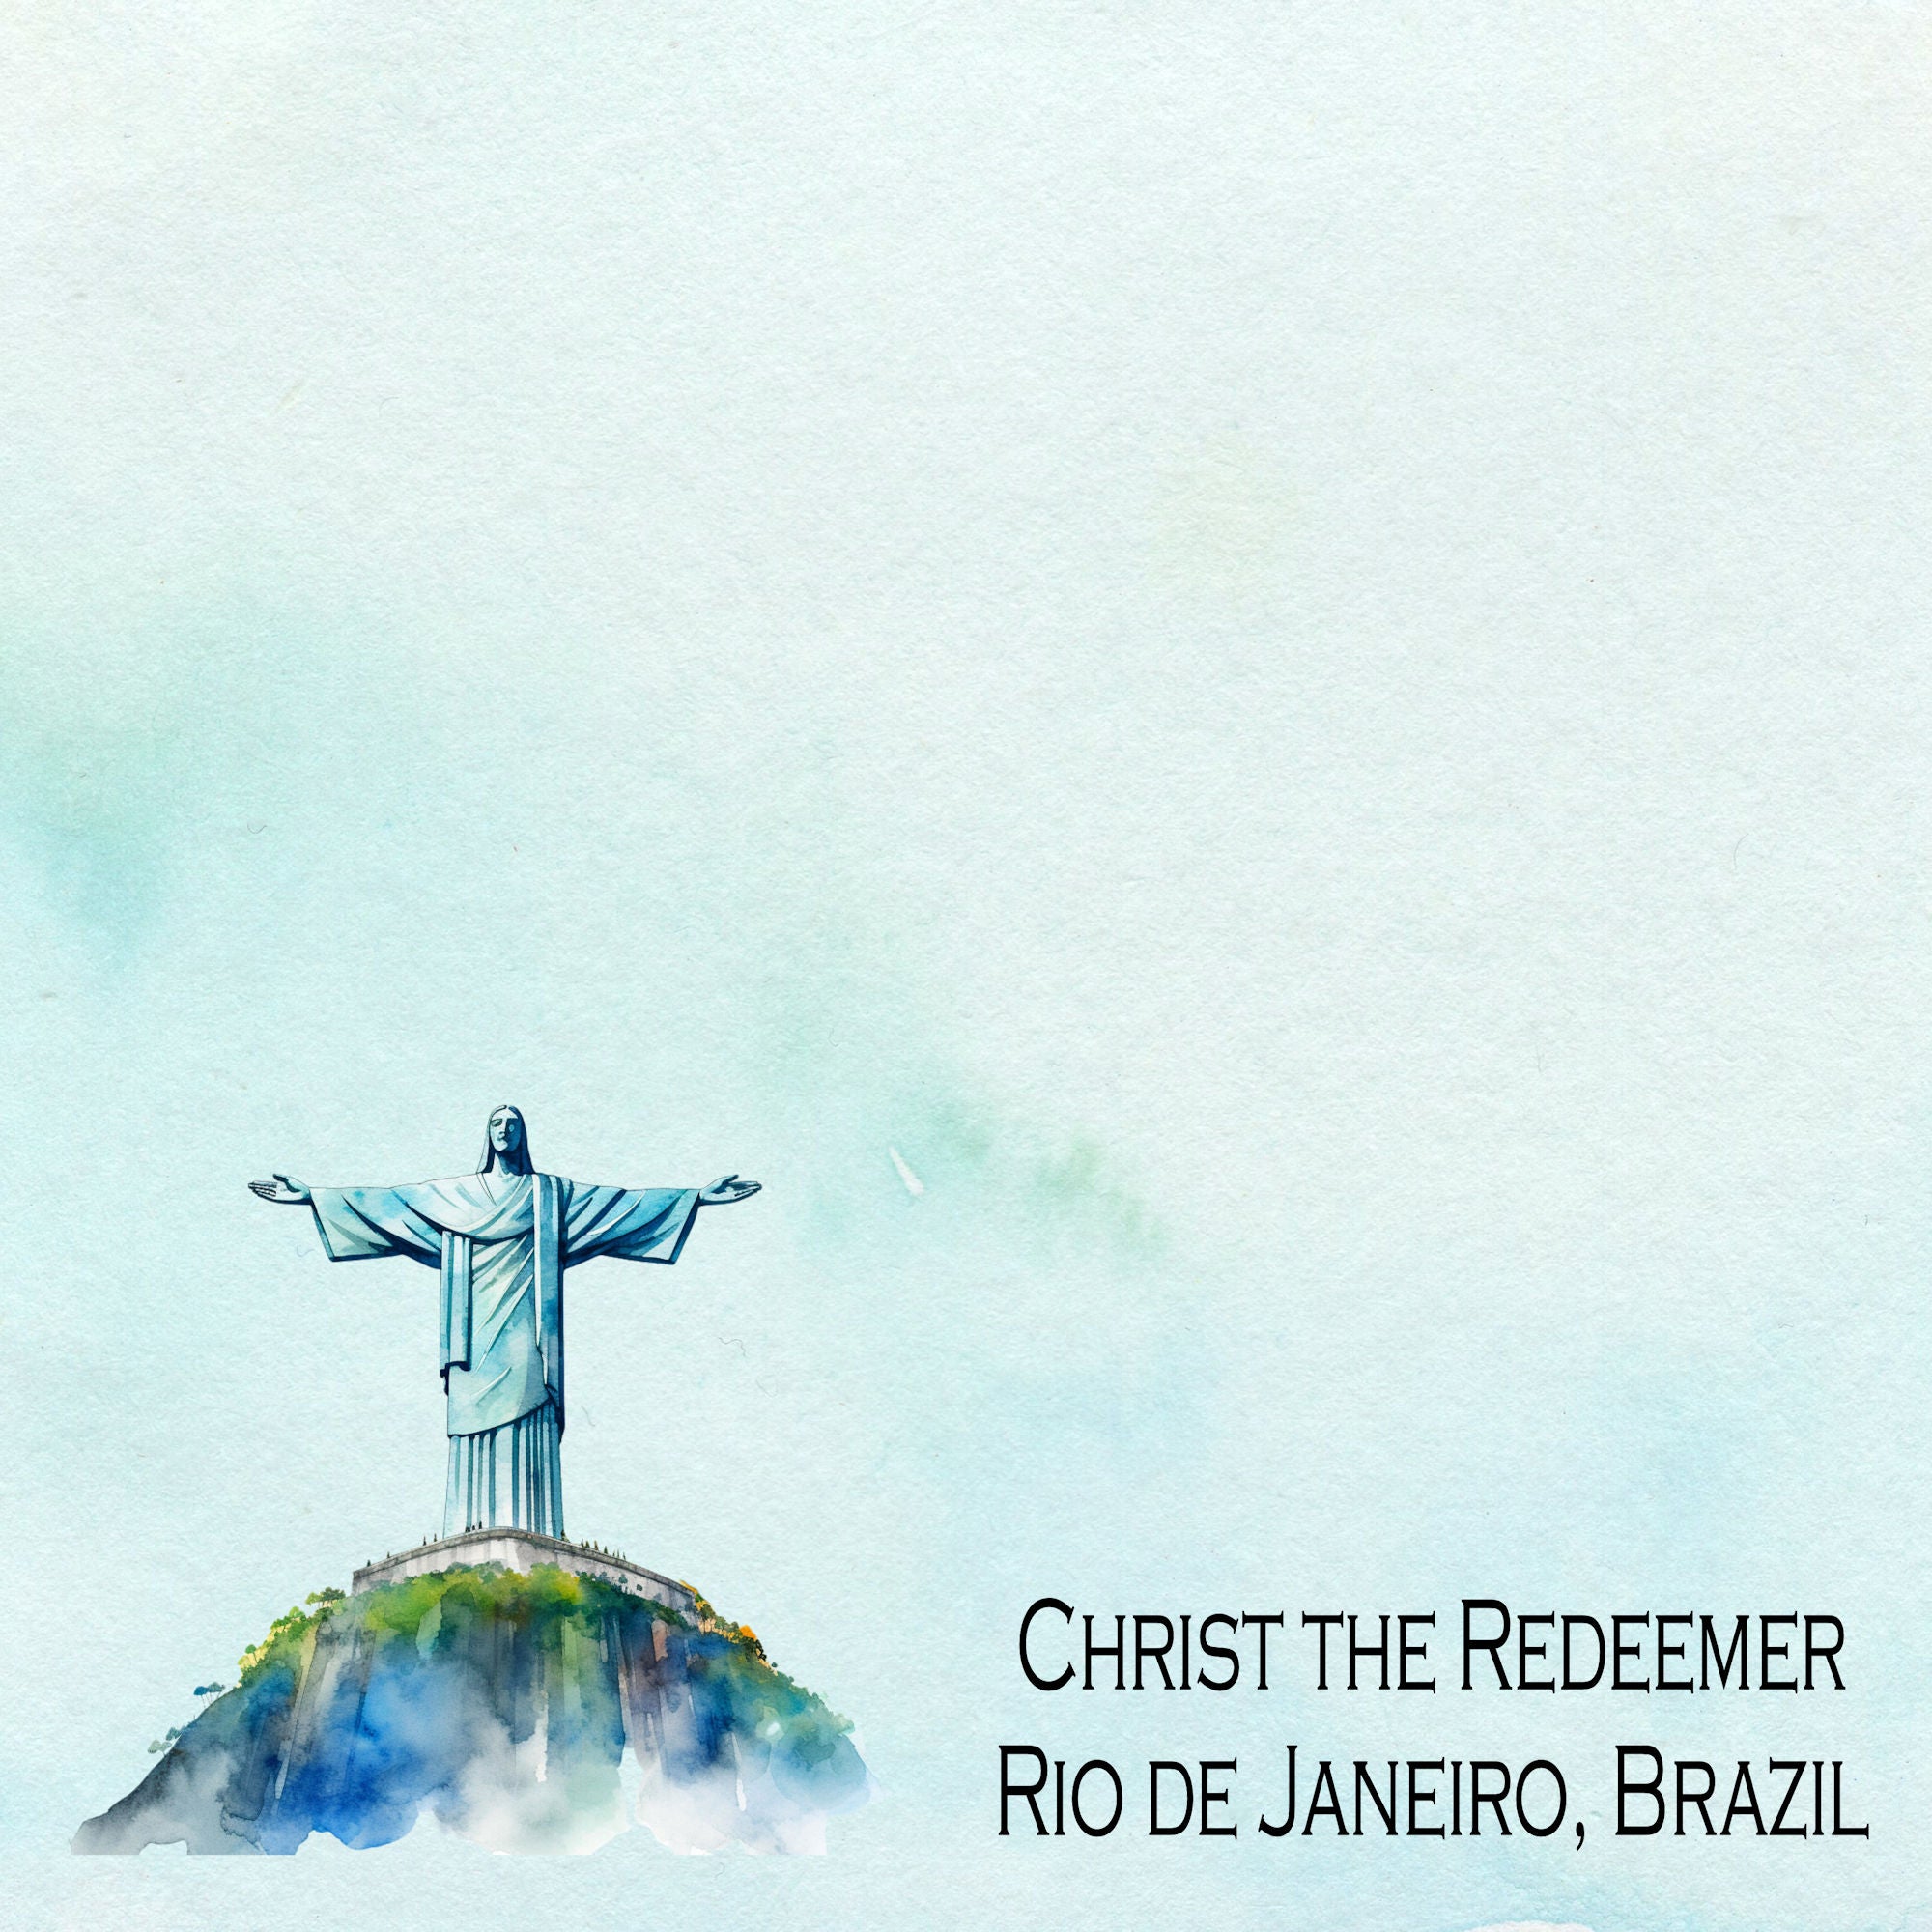 Seven Wonders Collection Christ The Redeemer 12 x 12 Double-Sided Scrapbook Paper by SSC Designs